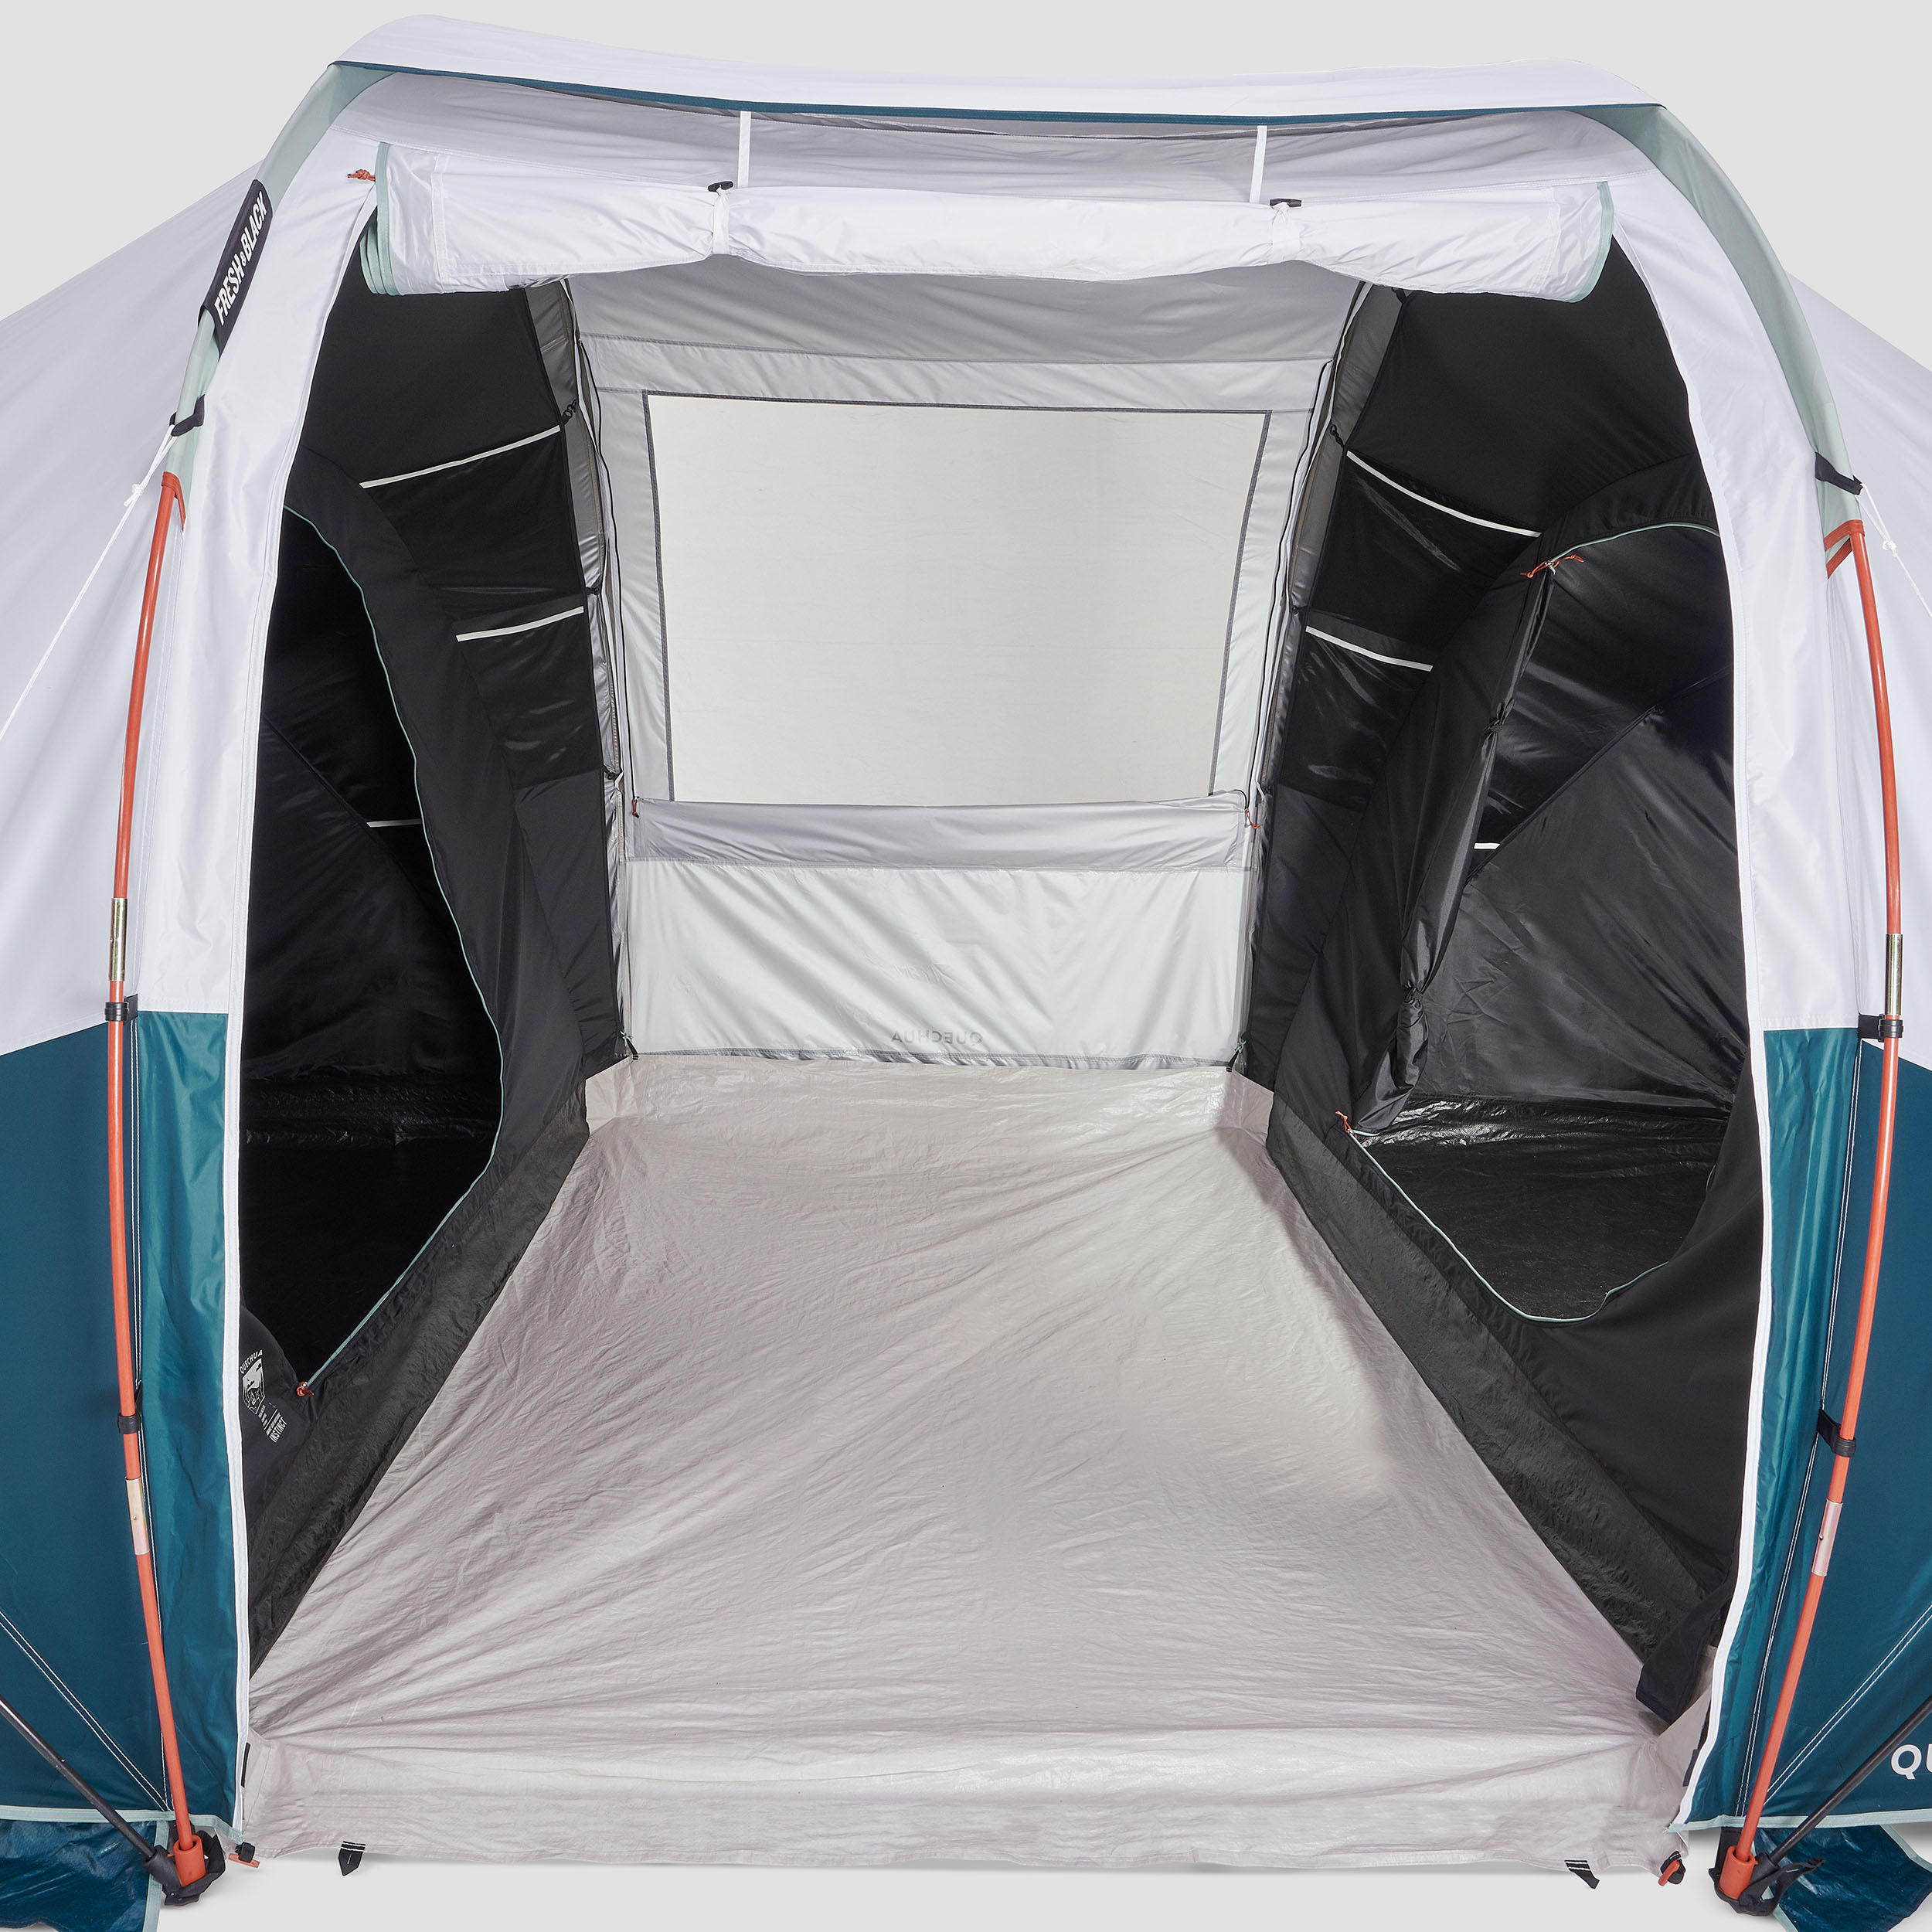 Camping tent with poles - Arpenaz 4.2 F&B - 4 Person - 2 Bedrooms 24/24